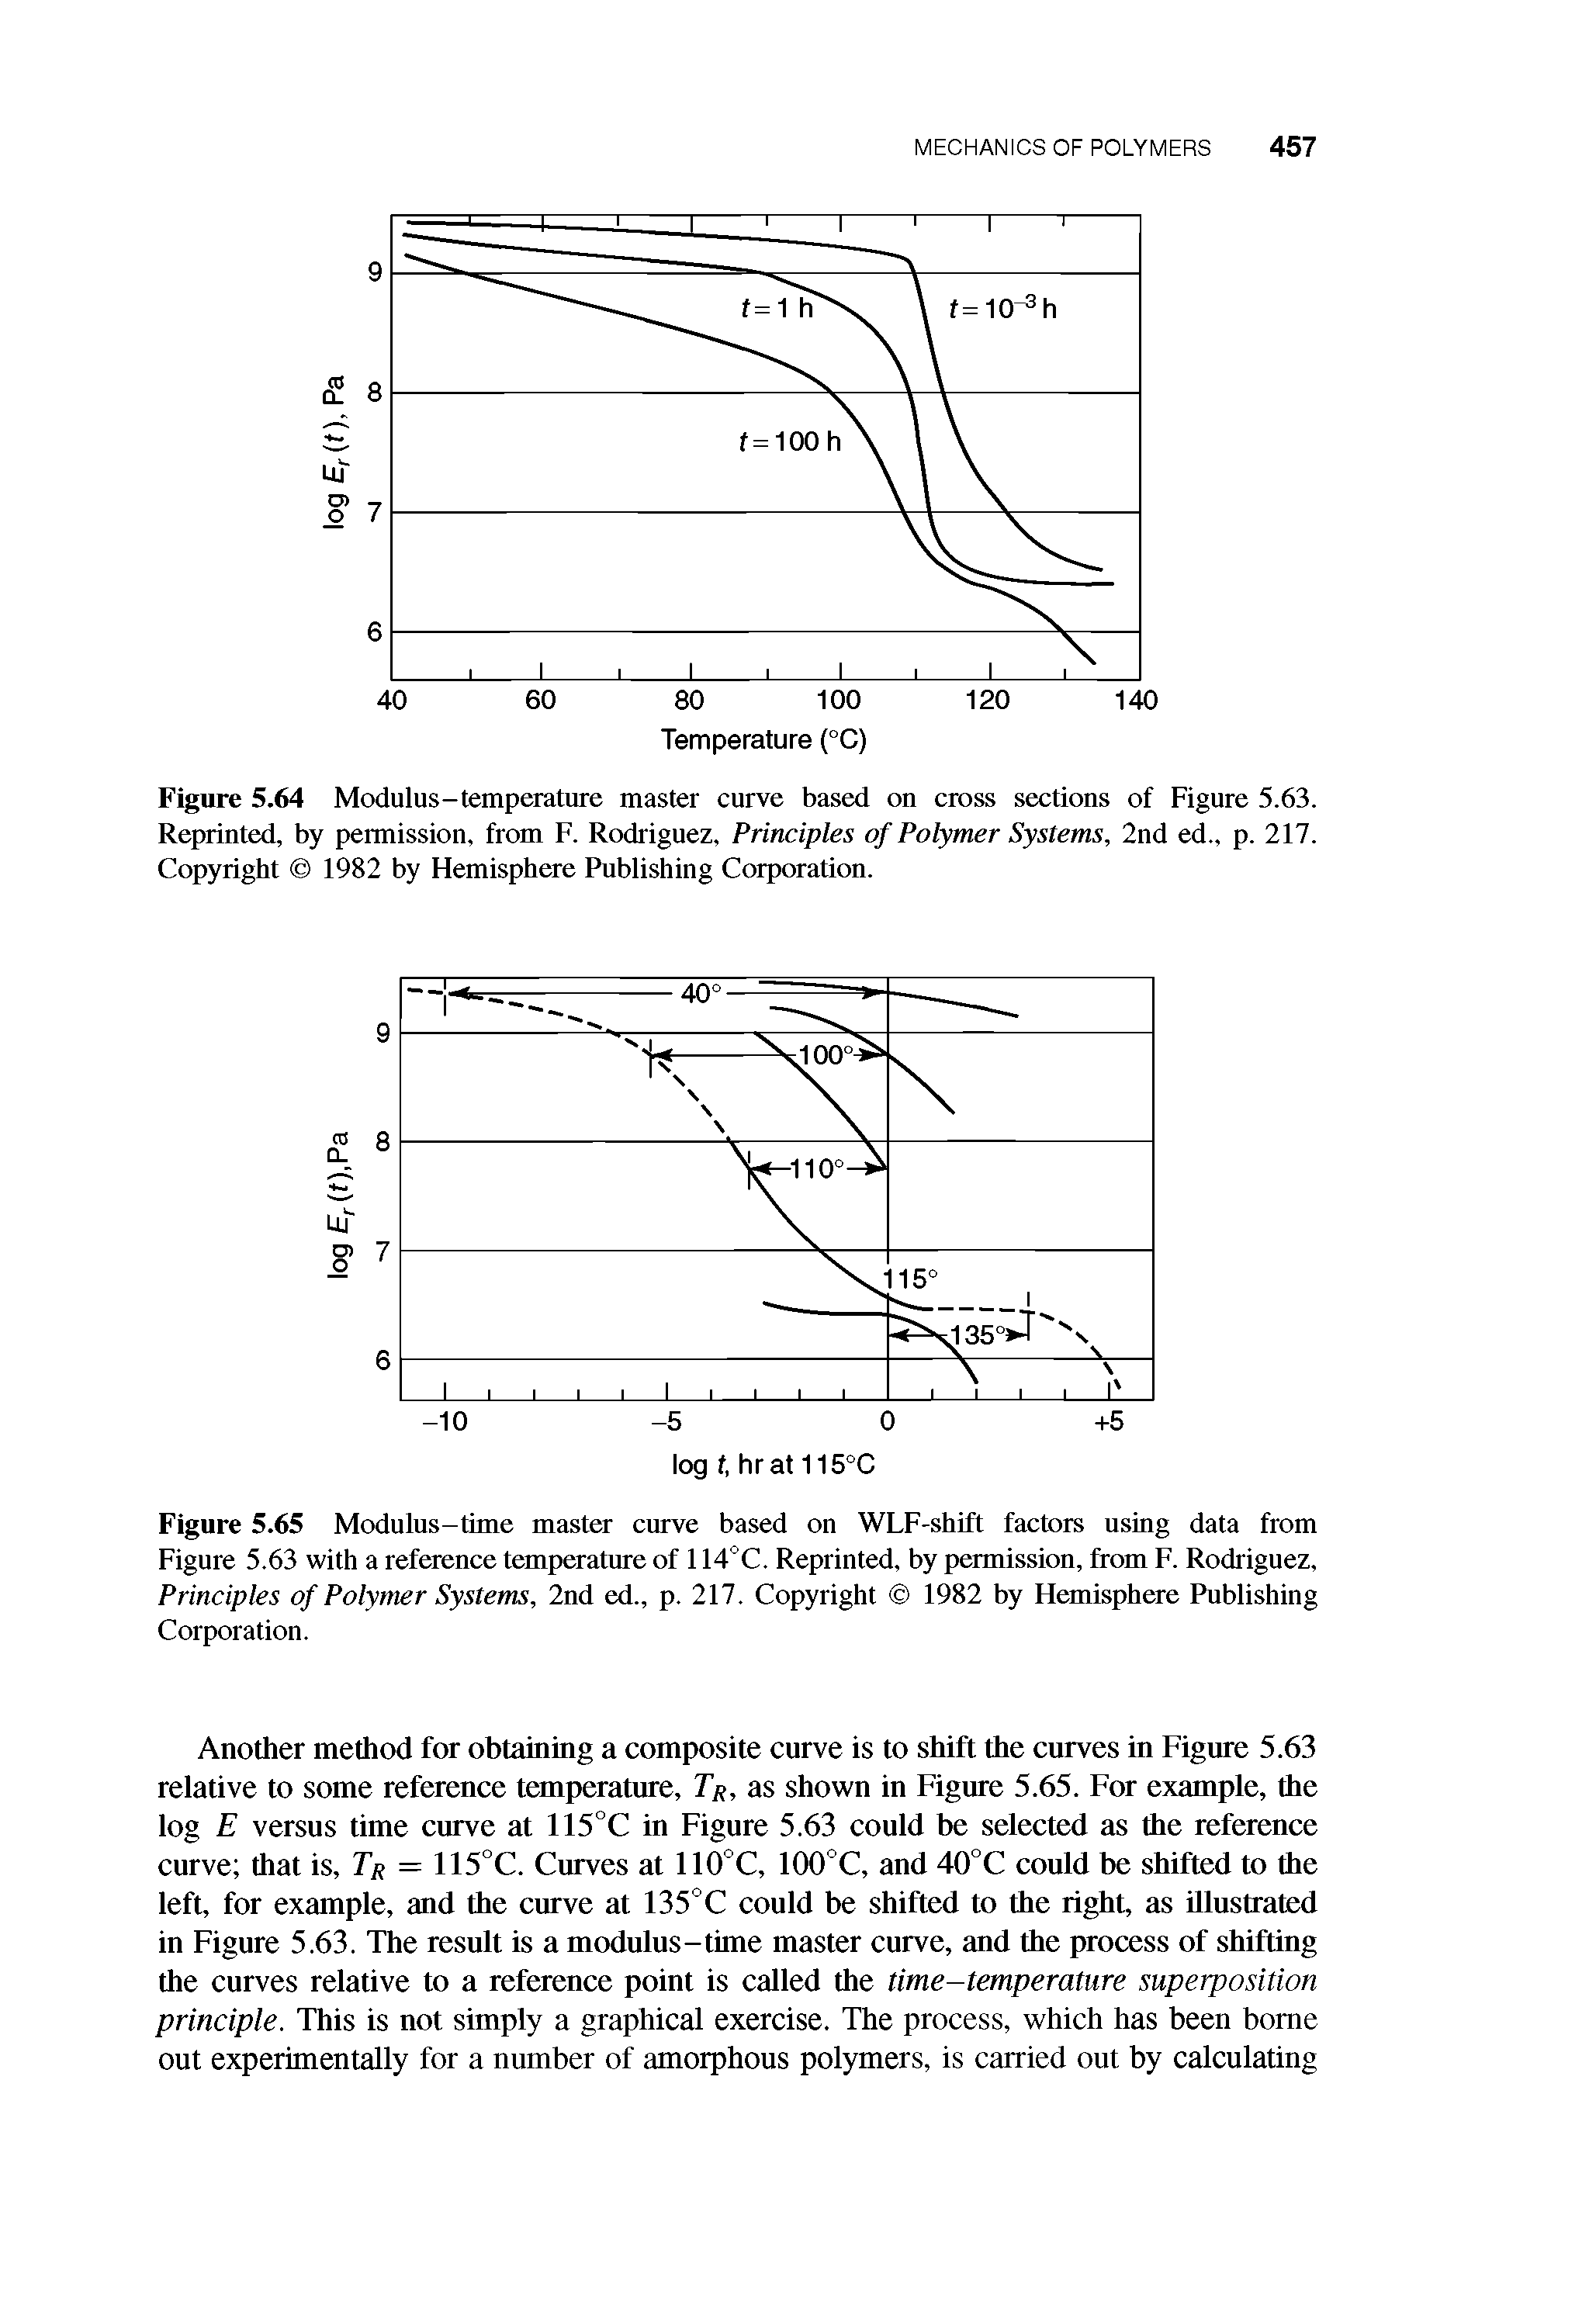 Figure 5.65 Modulus-time master curve based on WLF-shift factors using data from Figure 5.63 with a reference temperature of 114°C. Reprinted, by permission, from F. Rodriguez, Principles of Polymer Systems, 2nd ed., p. 217. Copyright 1982 by Hemisphere Publishing Corporation.